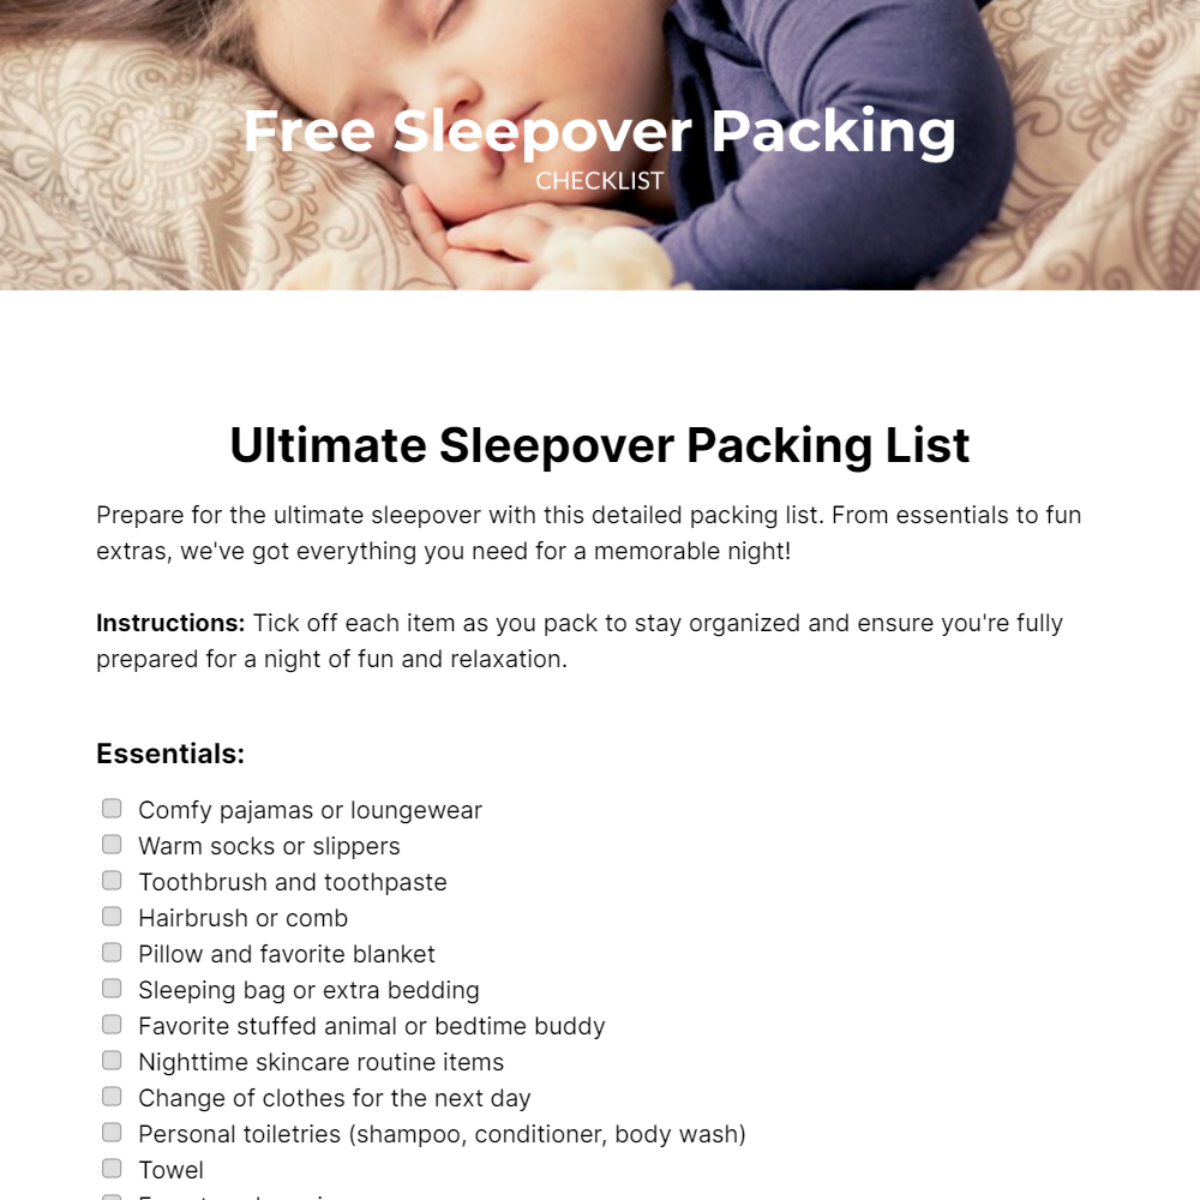 Sleepover Packing Checklist Template